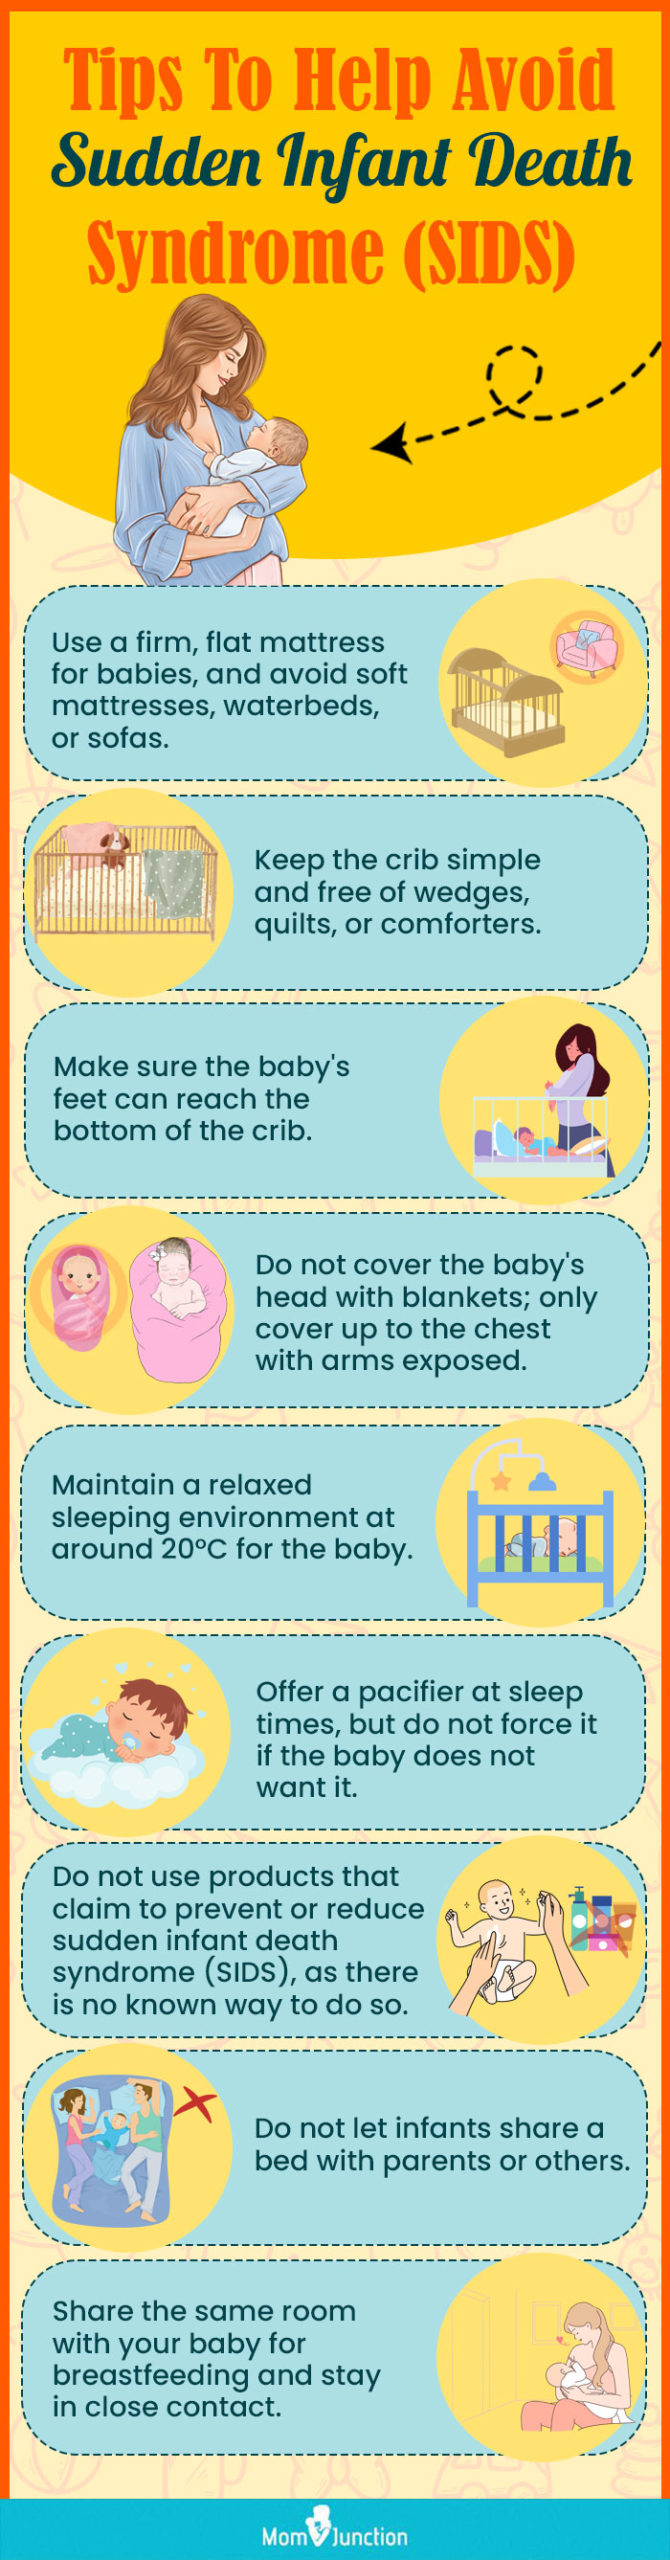 tips to help avoid sudden infant death syndrome [infographic]